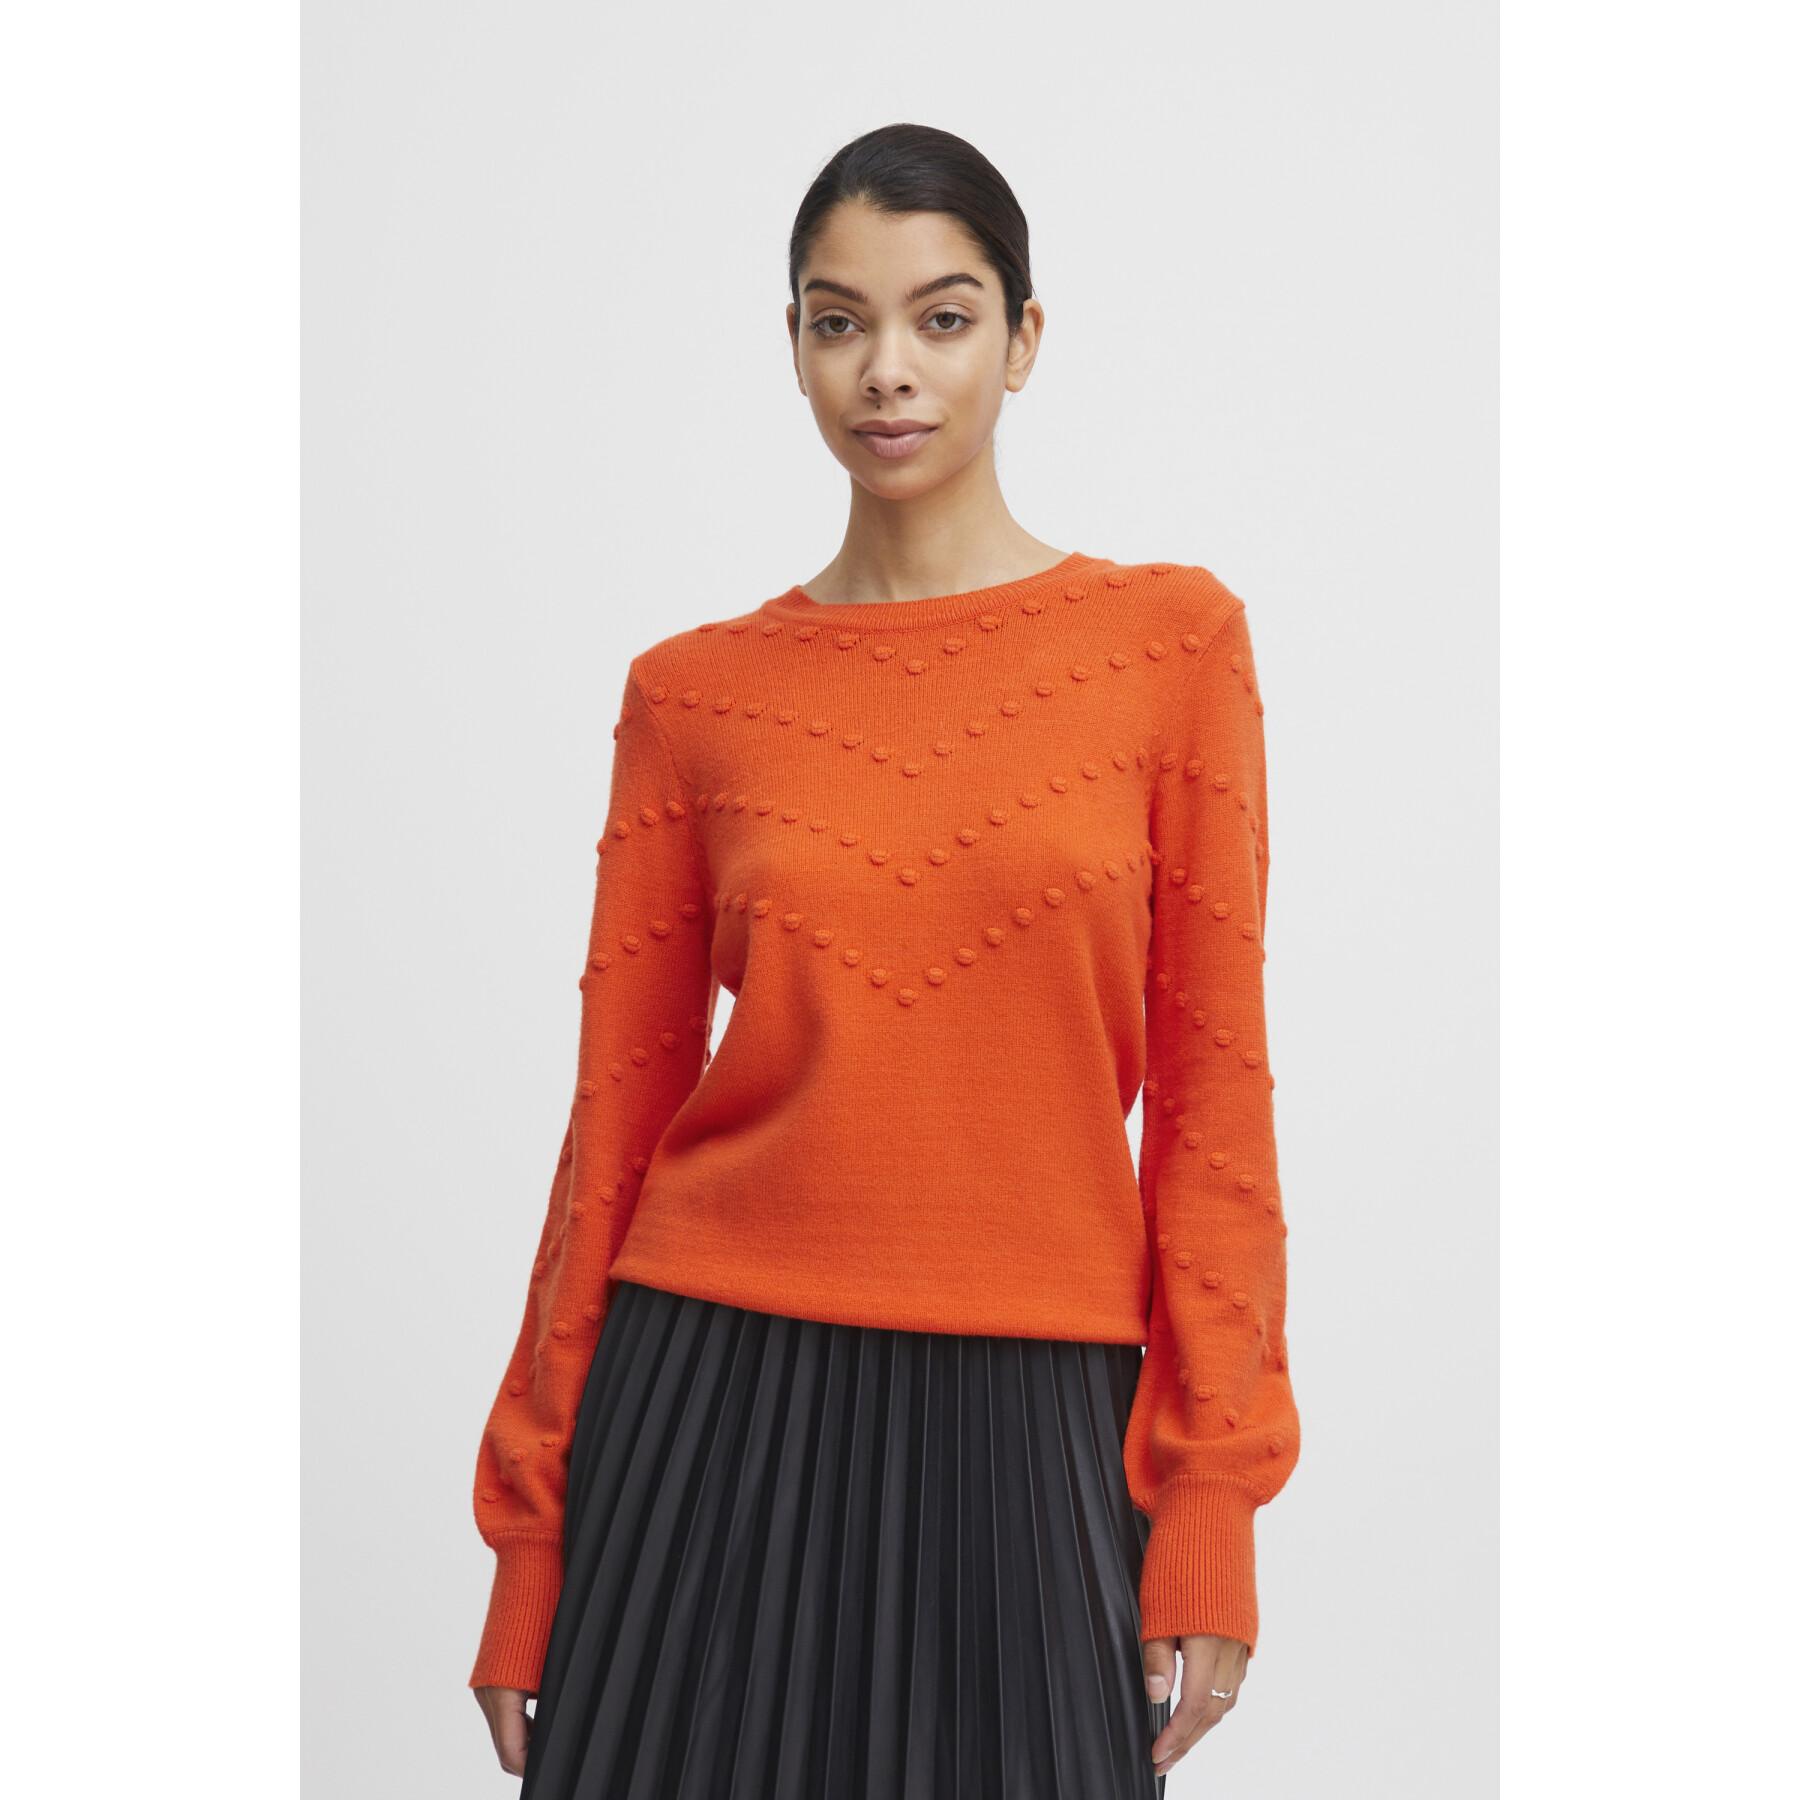 Pull femme b.young Nimona 3